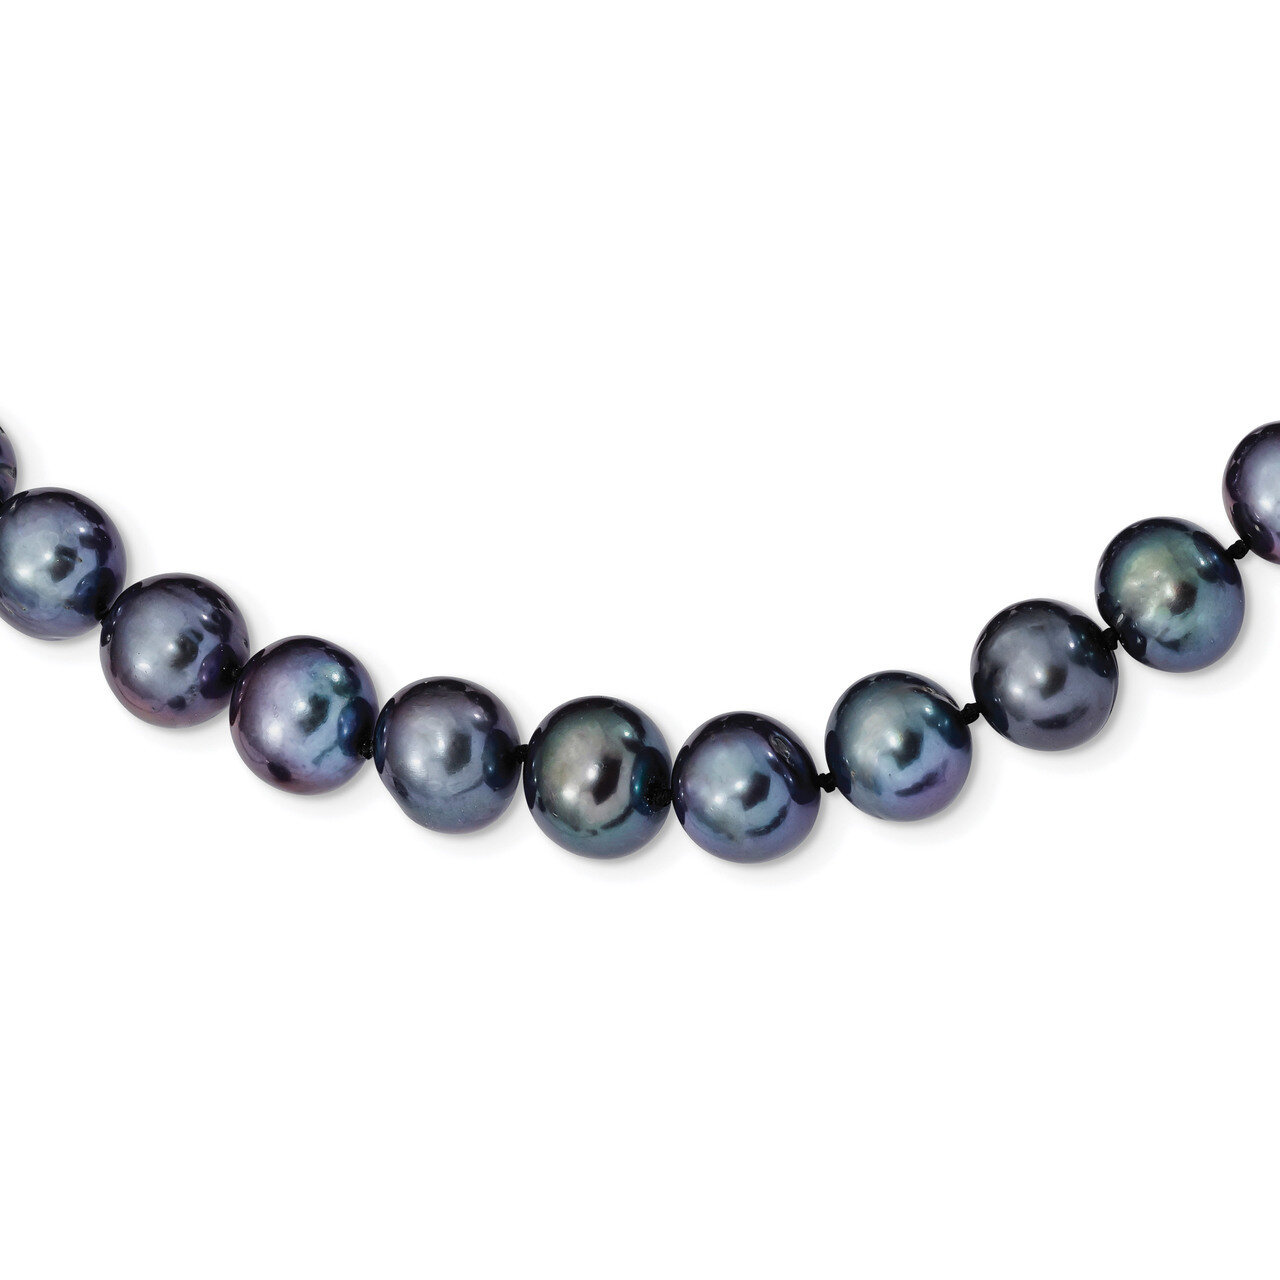 10-11mm Black Cultured Freshwater Pearl Necklace 20 Inch Sterling Silver Rhodium-plated QH5158-20